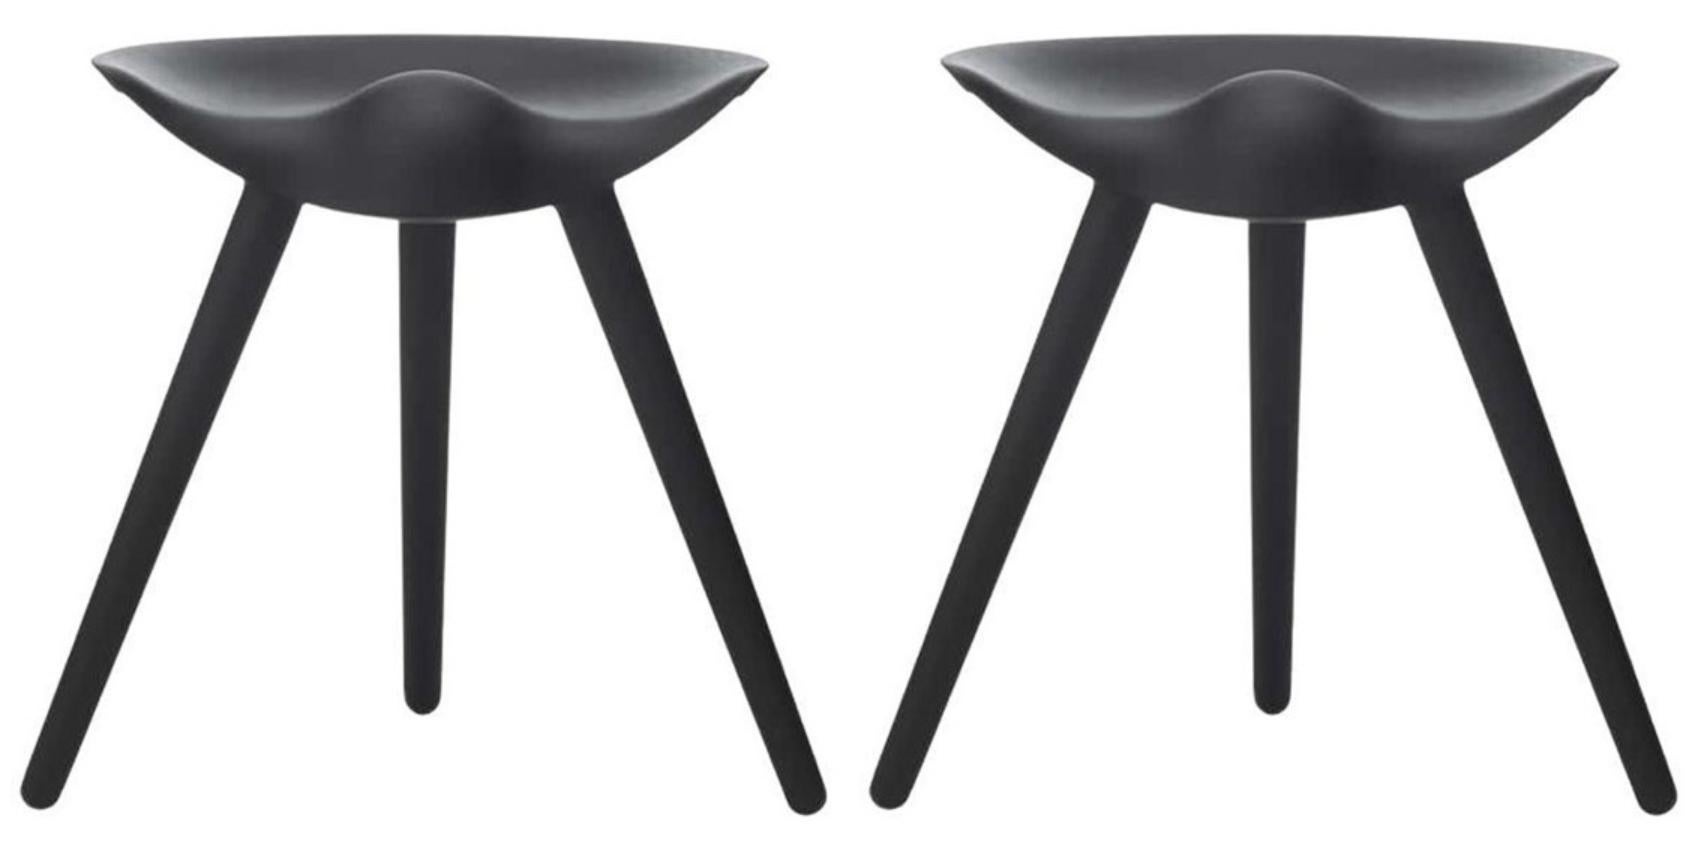 Set of 2 ML 42 black beech stools by Lassen.
Dimensions: H 48 x W 36 x L 55.5 cm.
Materials: Beech.

In 1942 Mogens Lassen designed the Stool ML42 as a piece for a furniture exhibition held at the Danish Museum of Decorative Art. He took inspiration